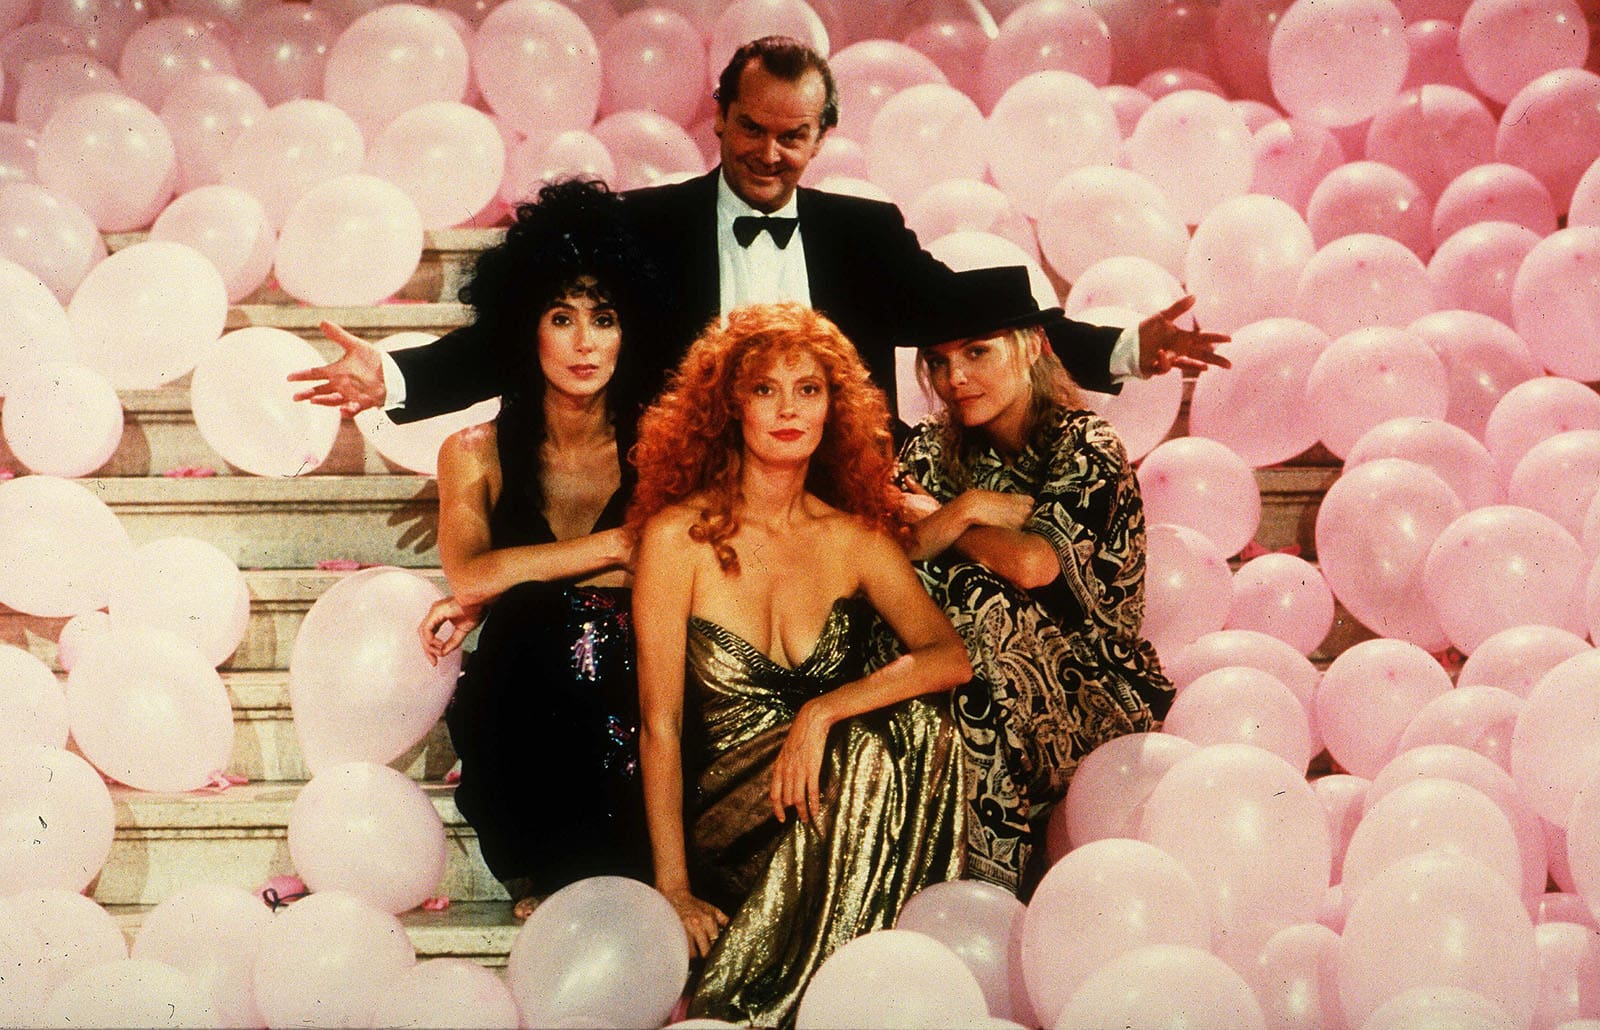 The Witches Of Eastwick (1987) movie review